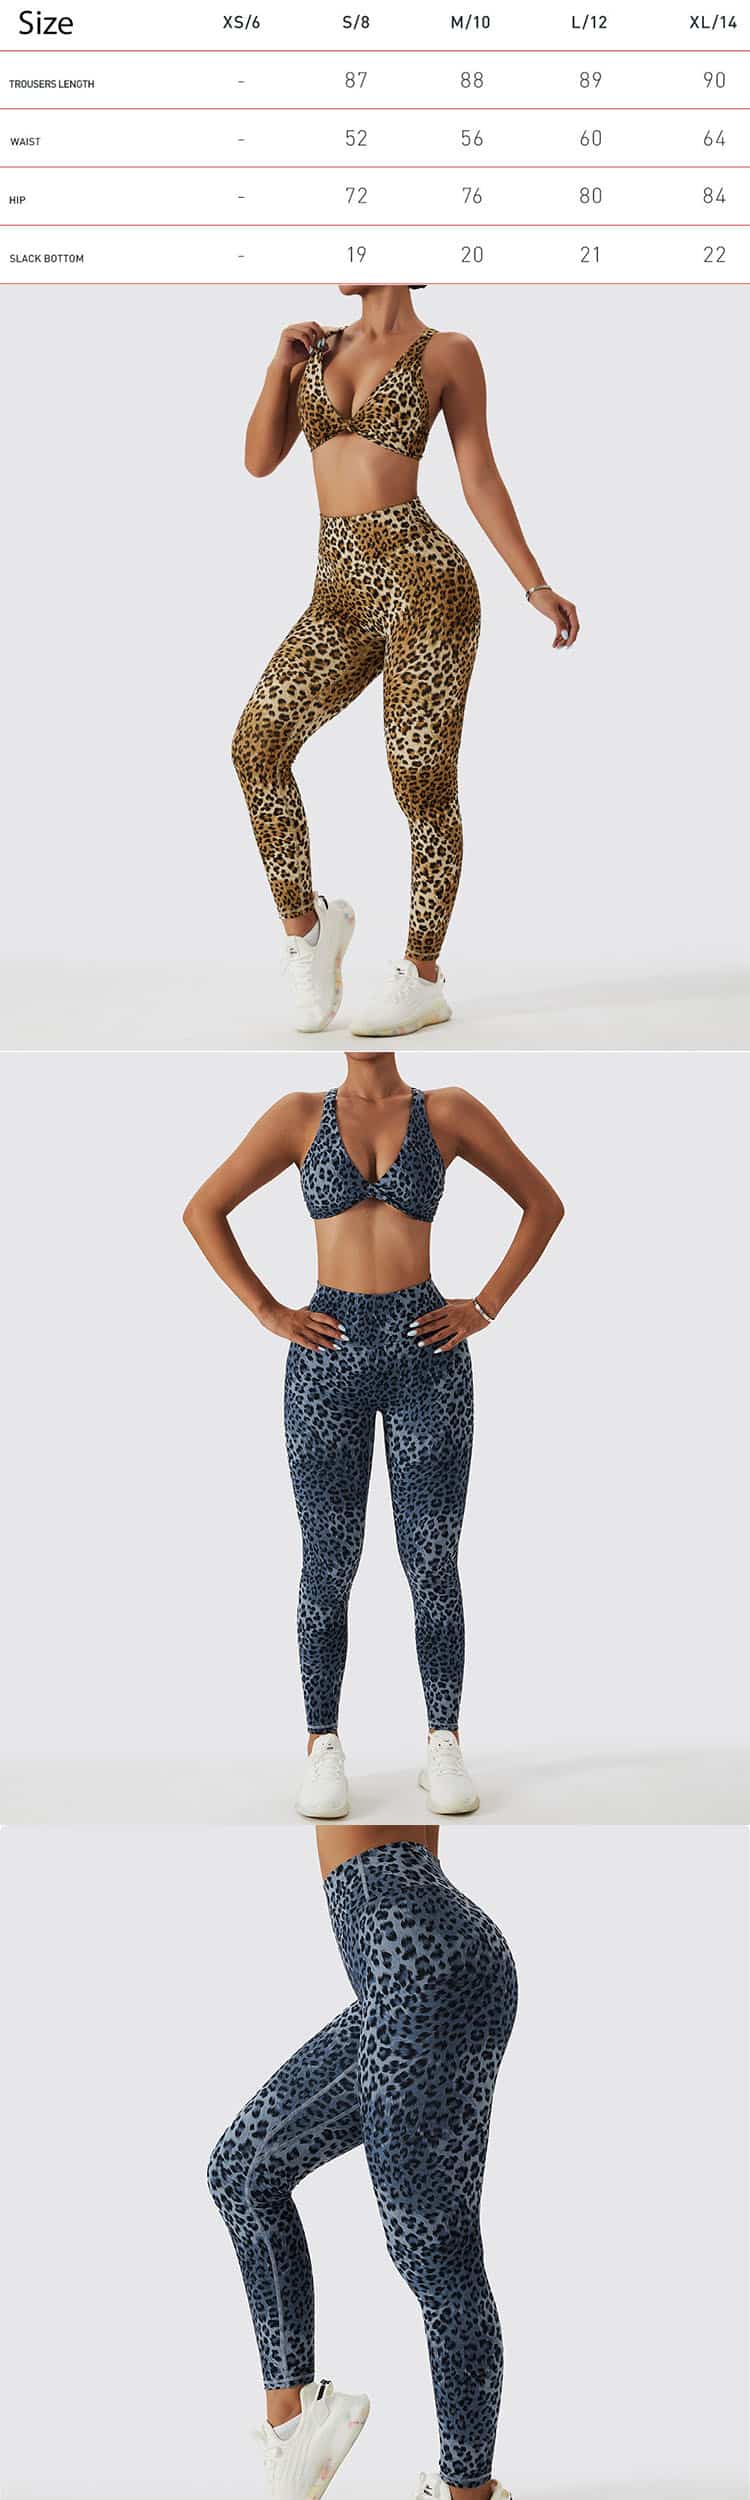 With the strong return of animal print, Leopard print running leggings